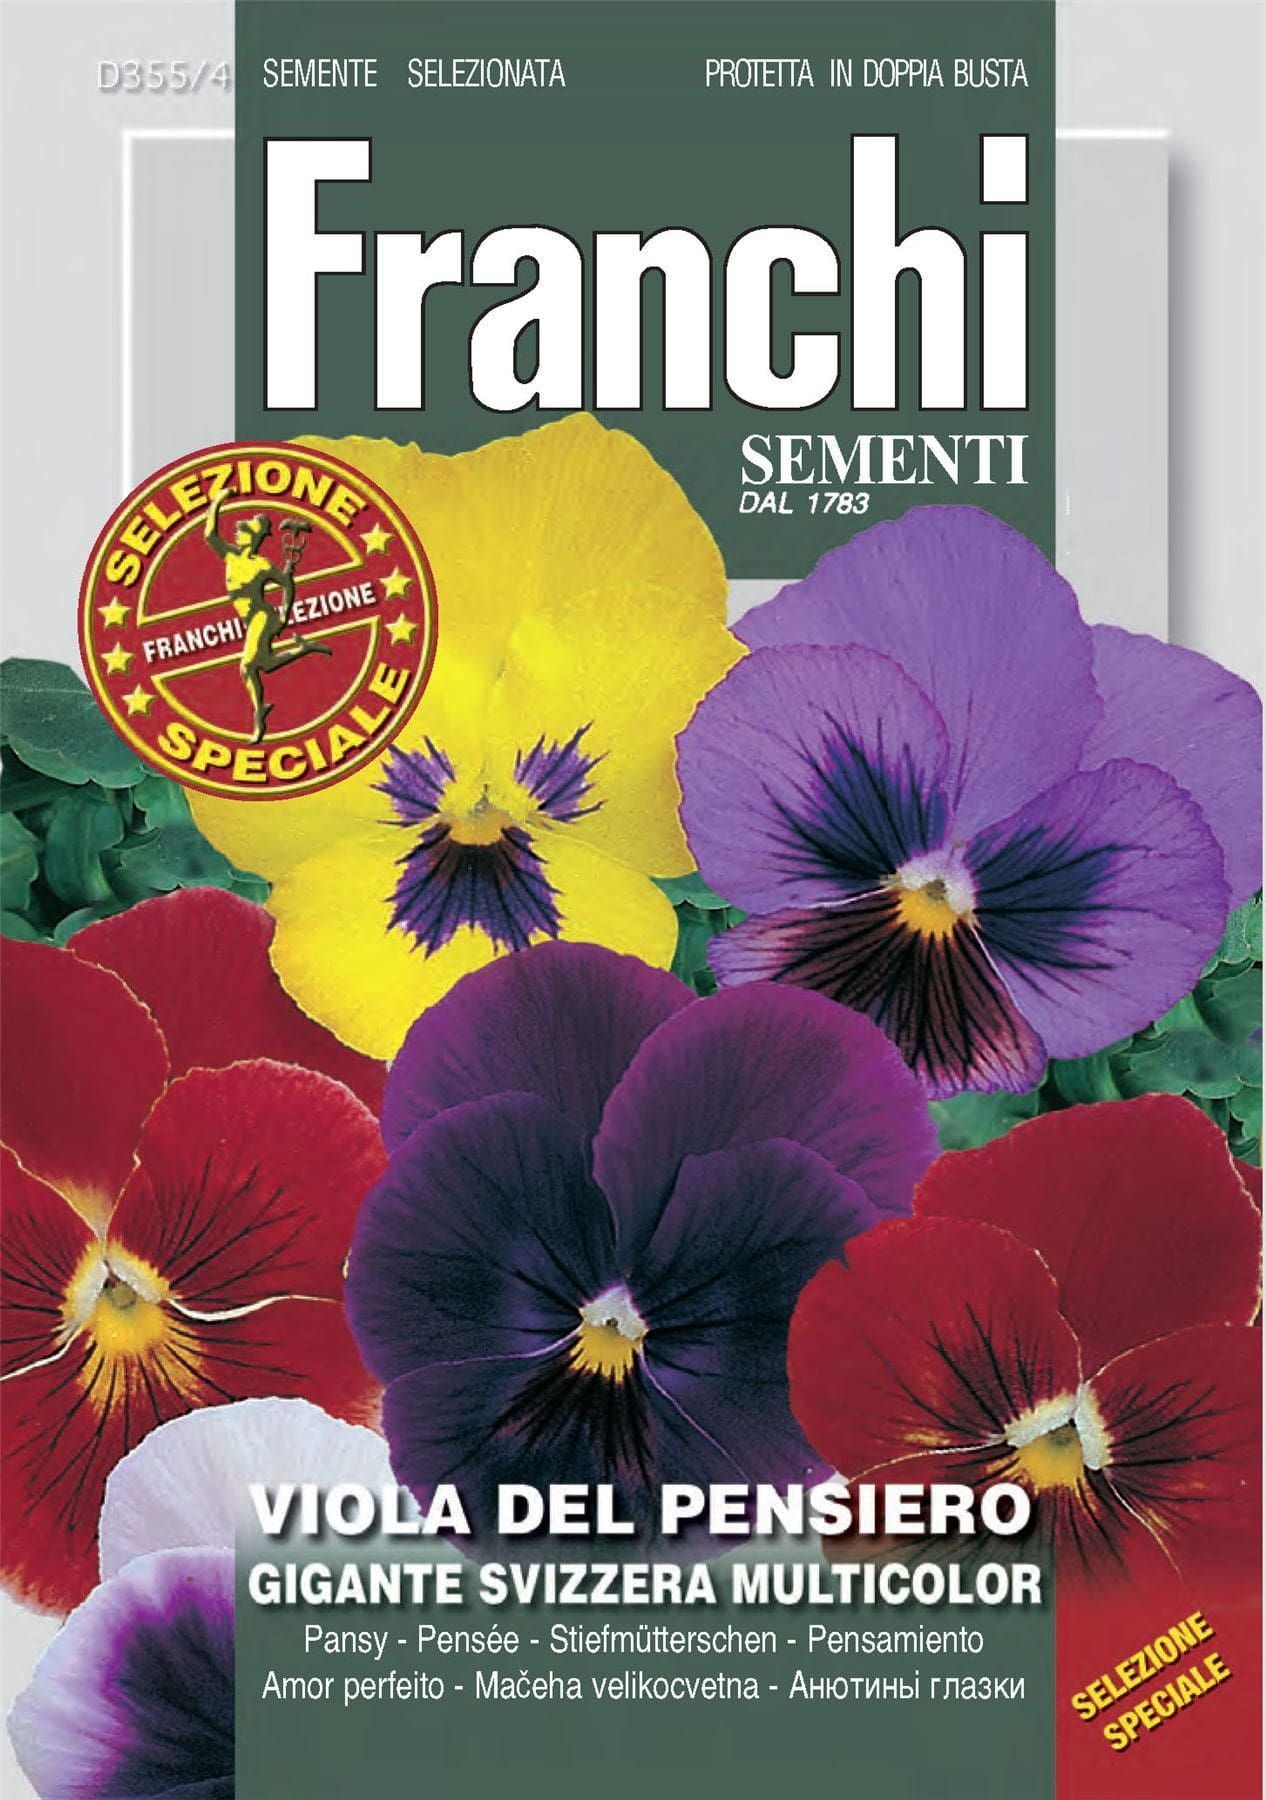 Franchi Seeds of Italy - Flower - FDBF_S 355-4 - Viola - Gigantic Swiss Mix - Seeds